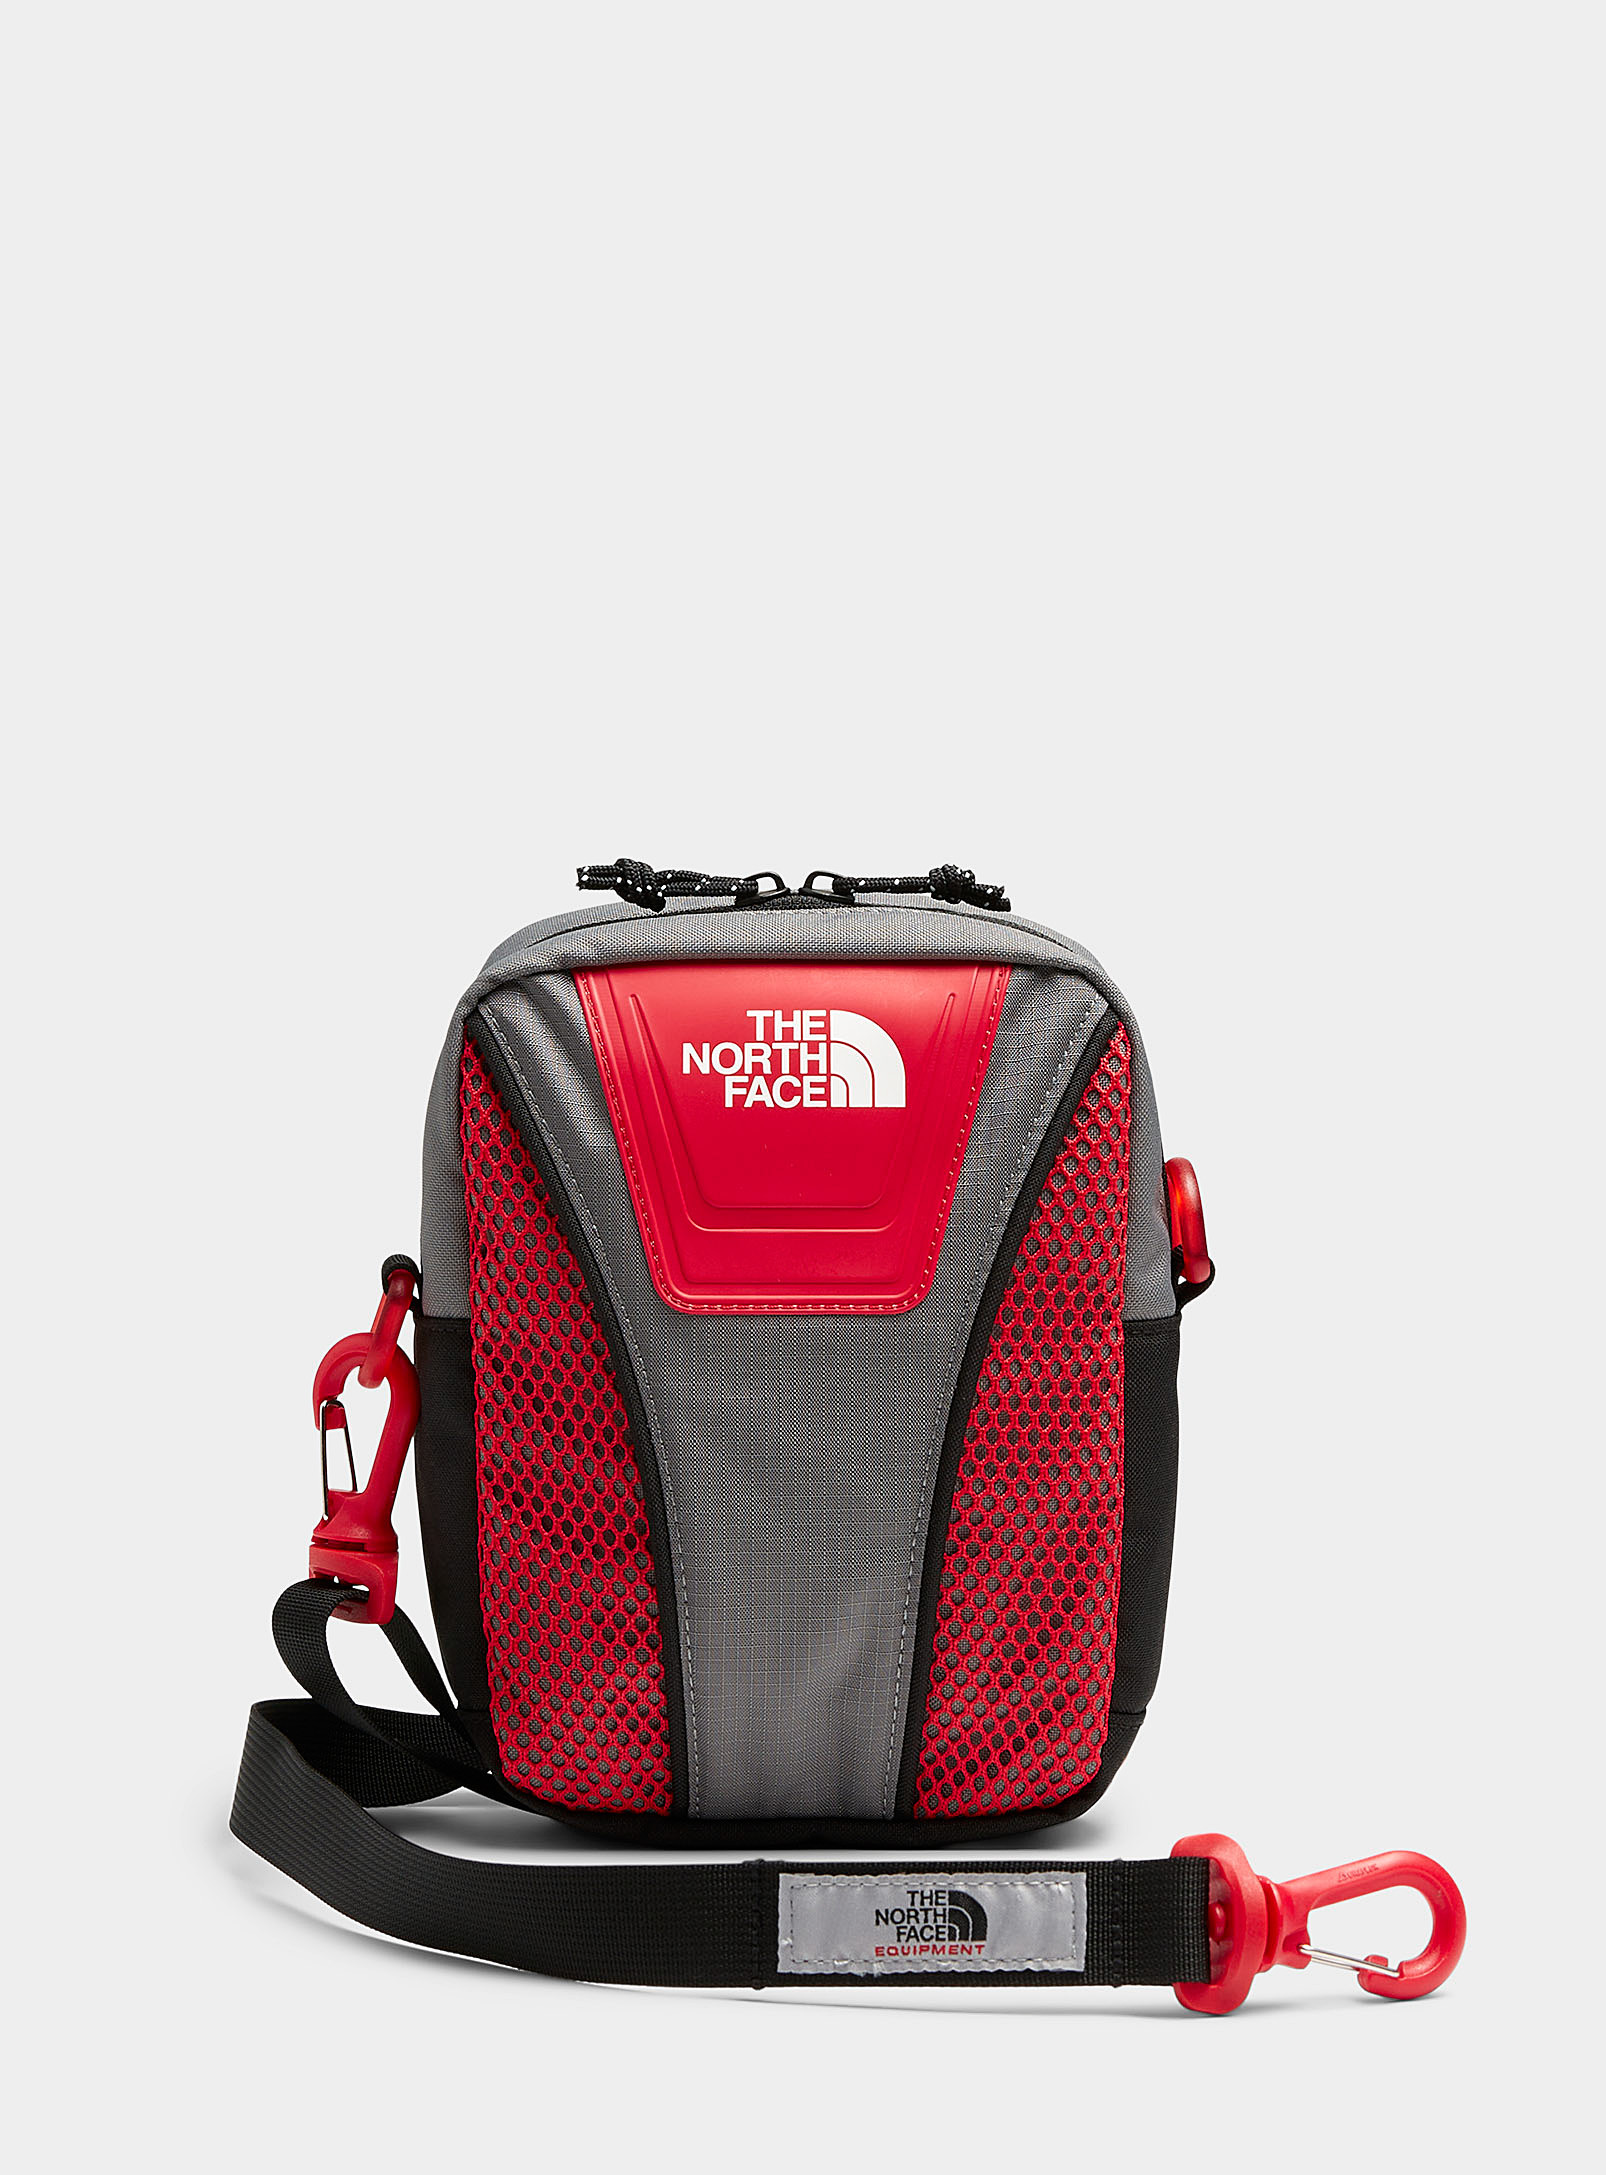 The North Face Racing Shoulder Bag In Brown